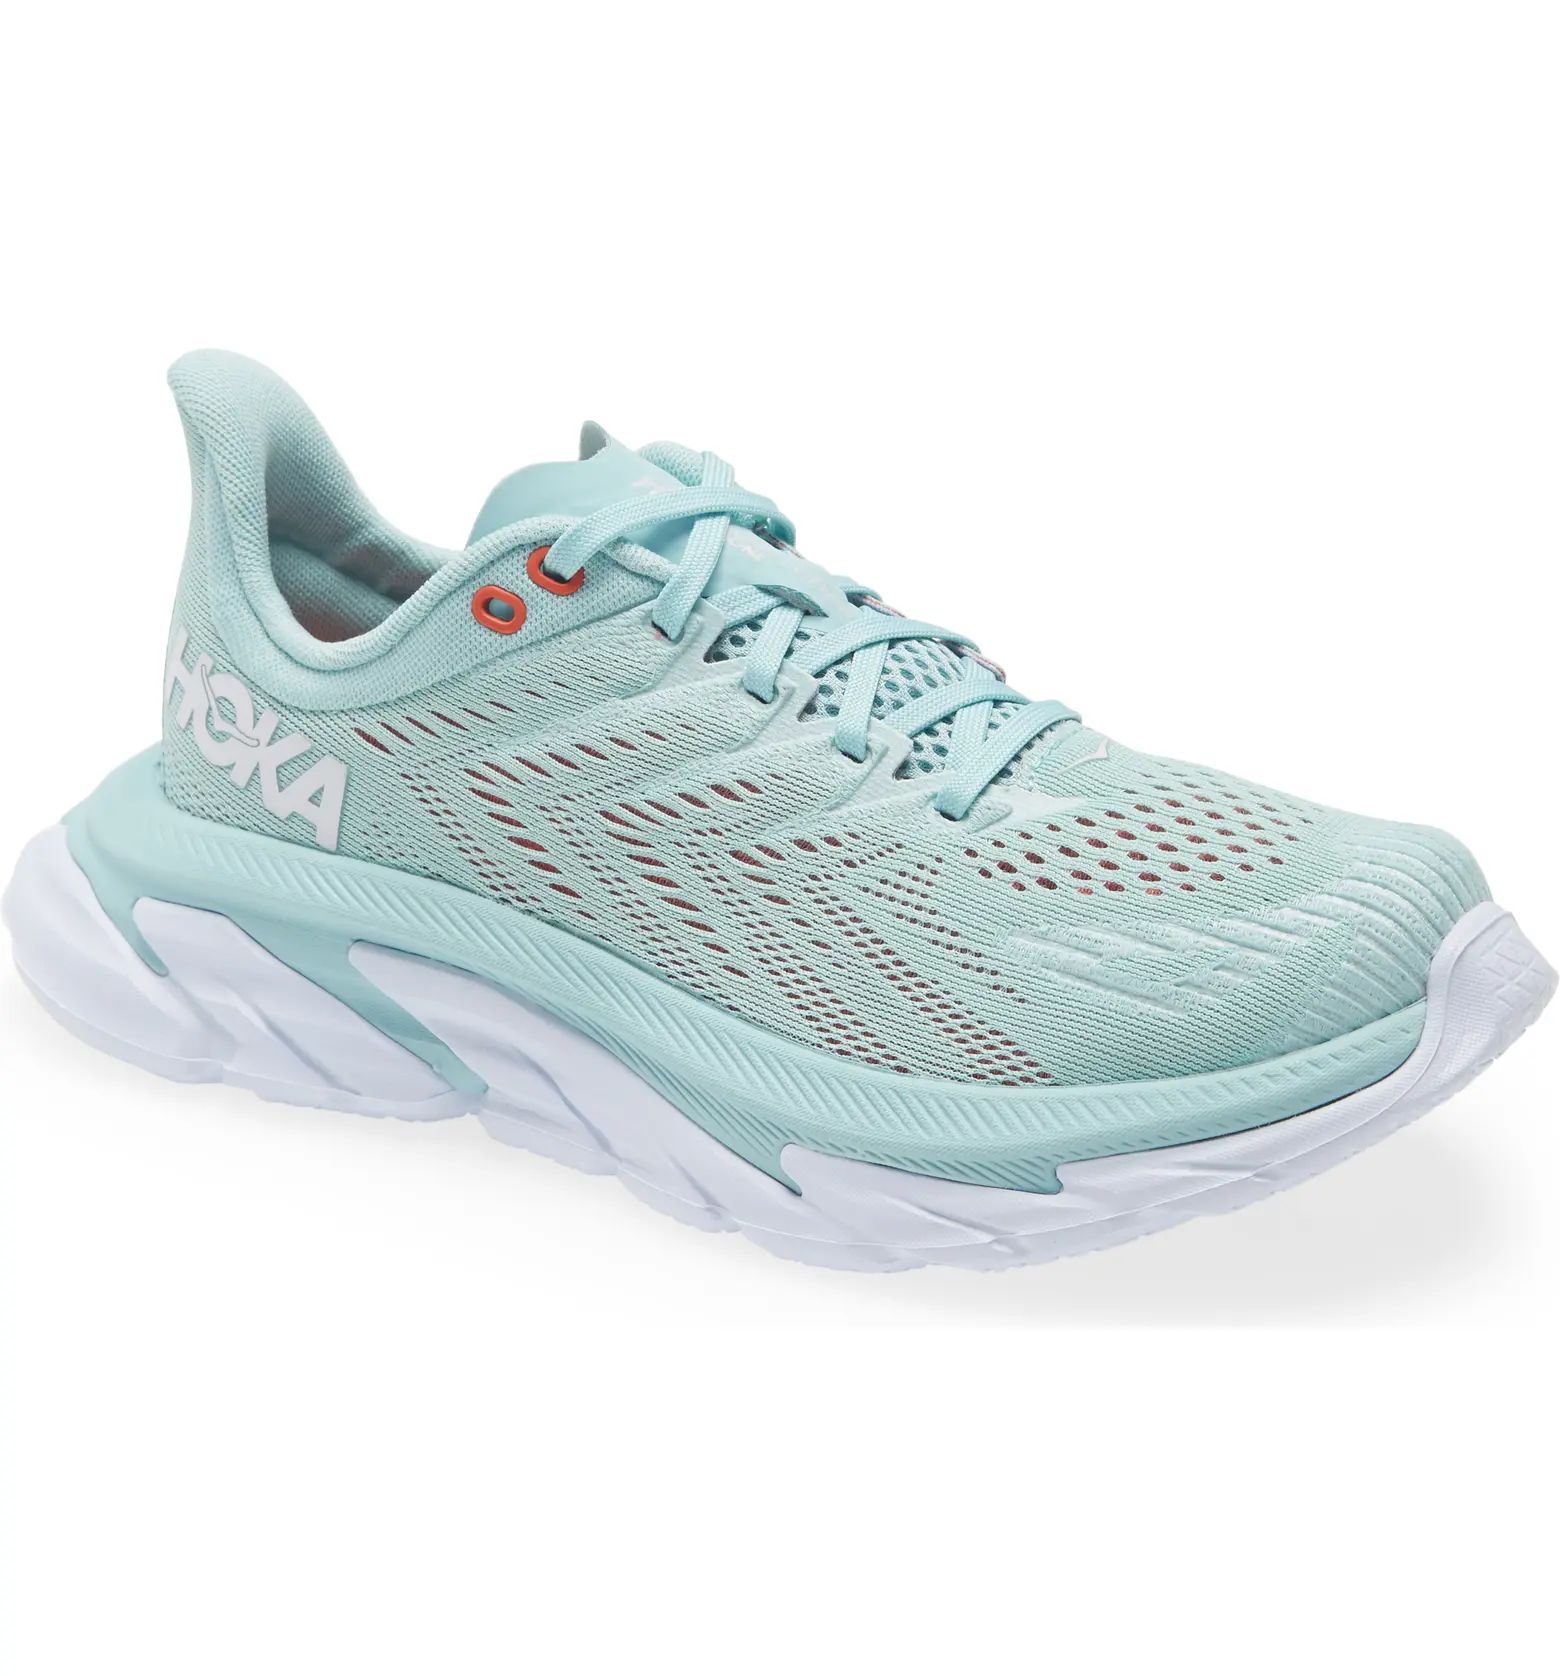 ONE ONE Clifton Edge Running Shoe | Nordstrom